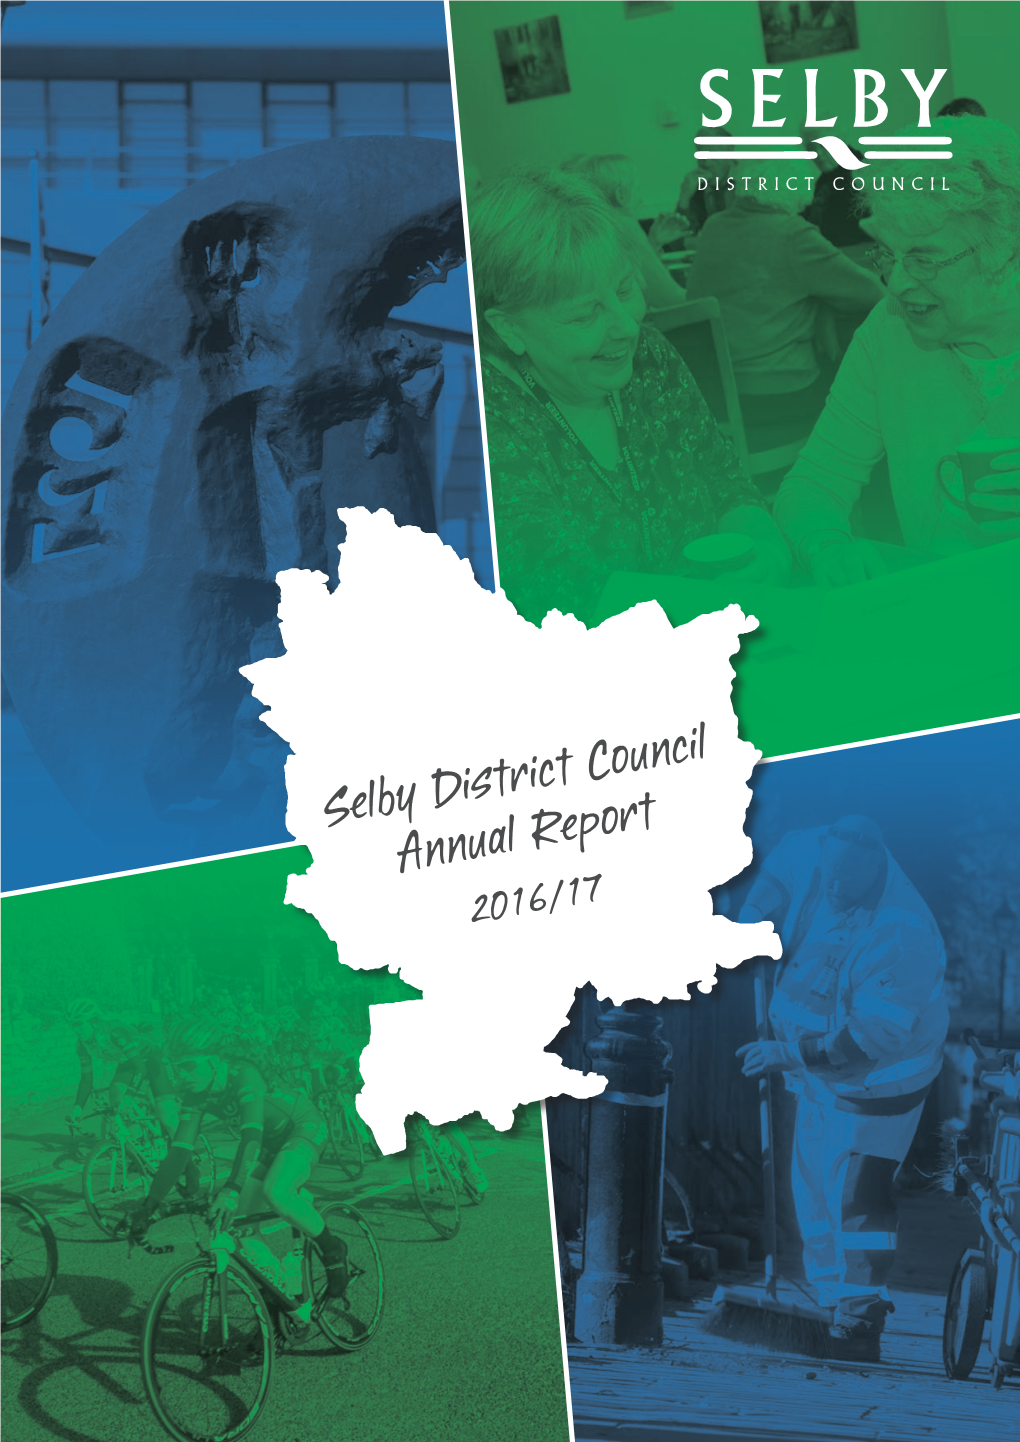 Selby District Council Annual Report 2016/17 Selby District Council Annual Report 2016 - 2017